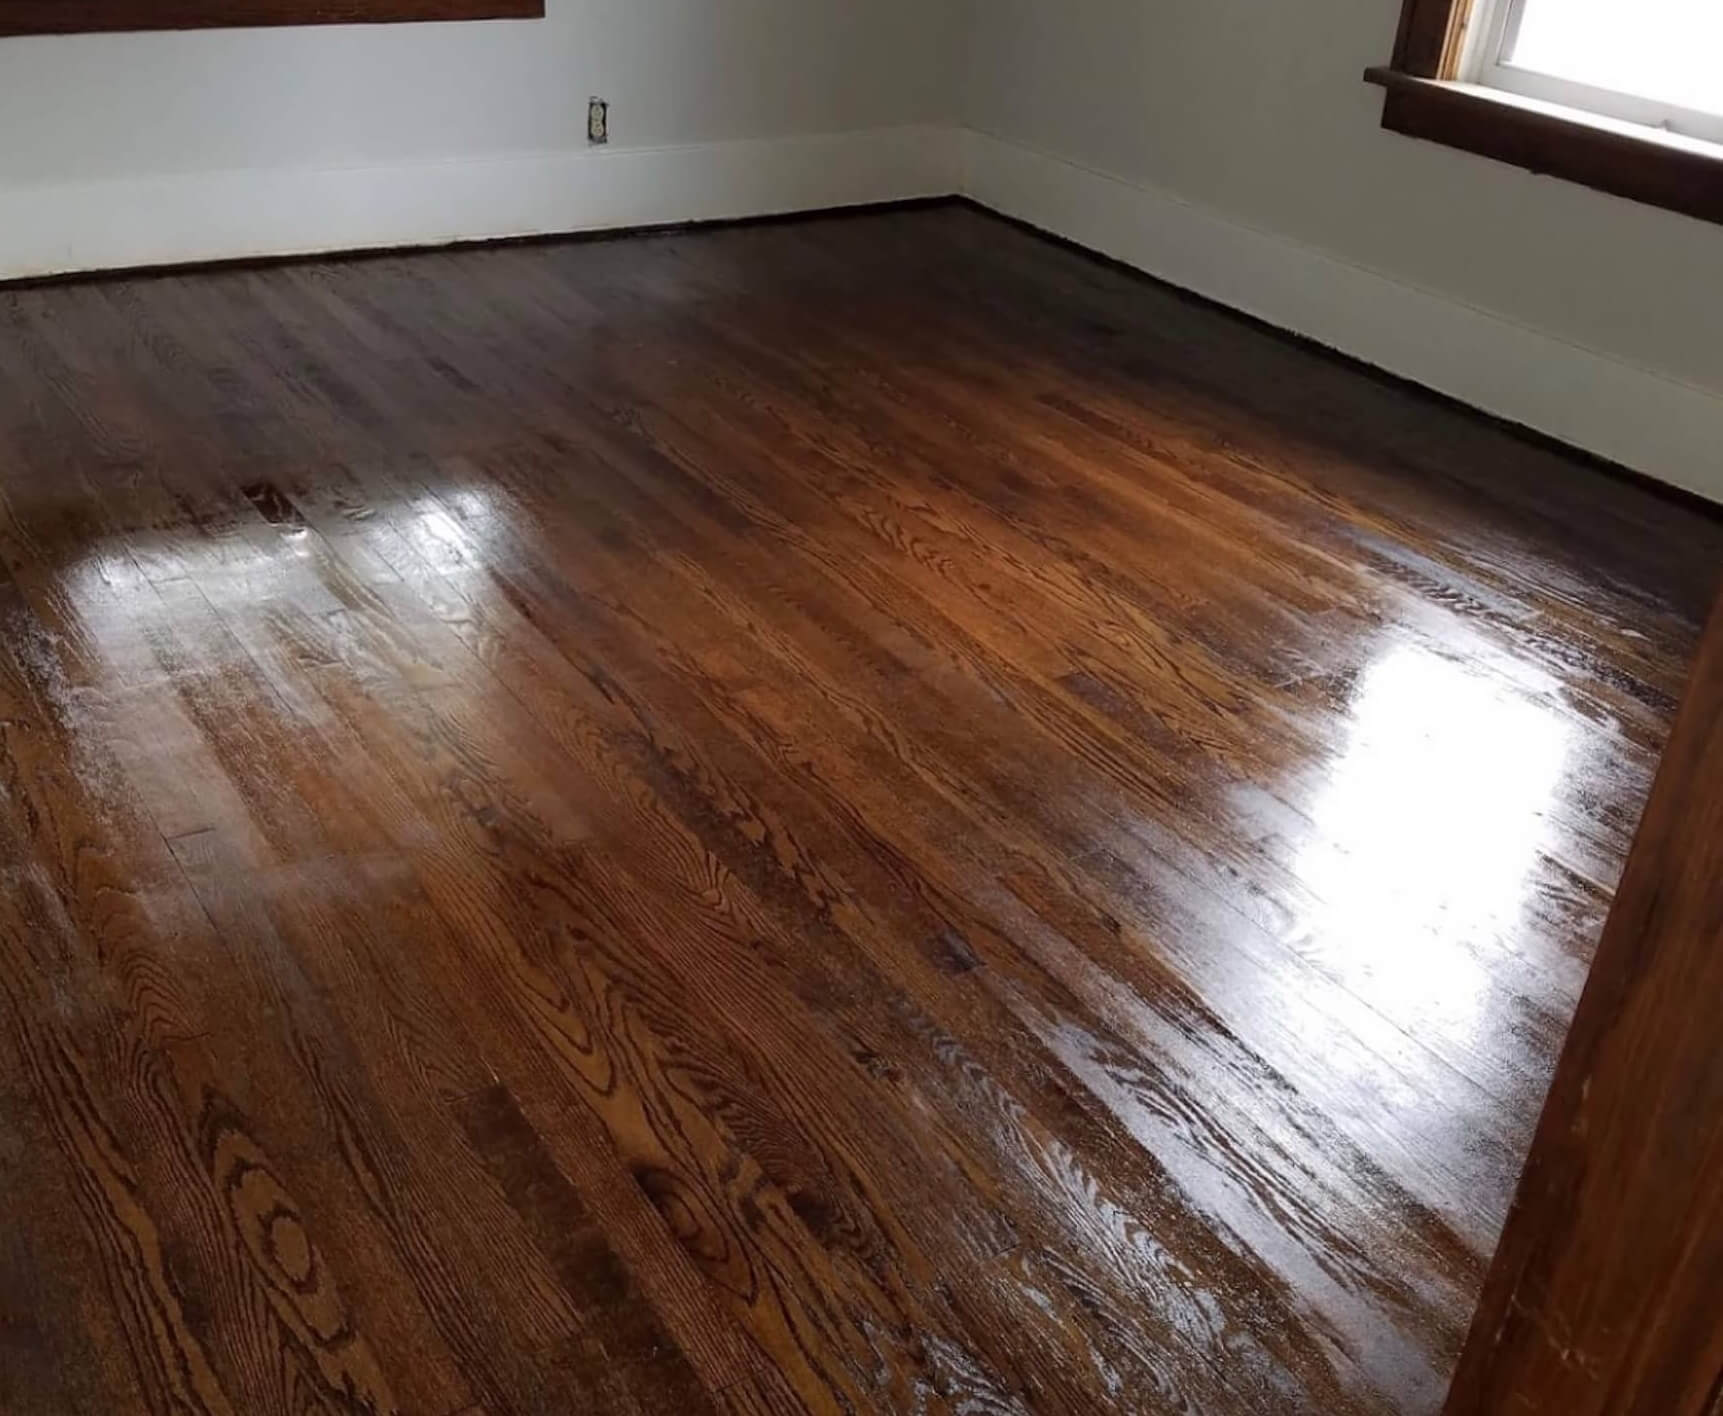 a cleaned up and refinished hardwood floor in the detroit area